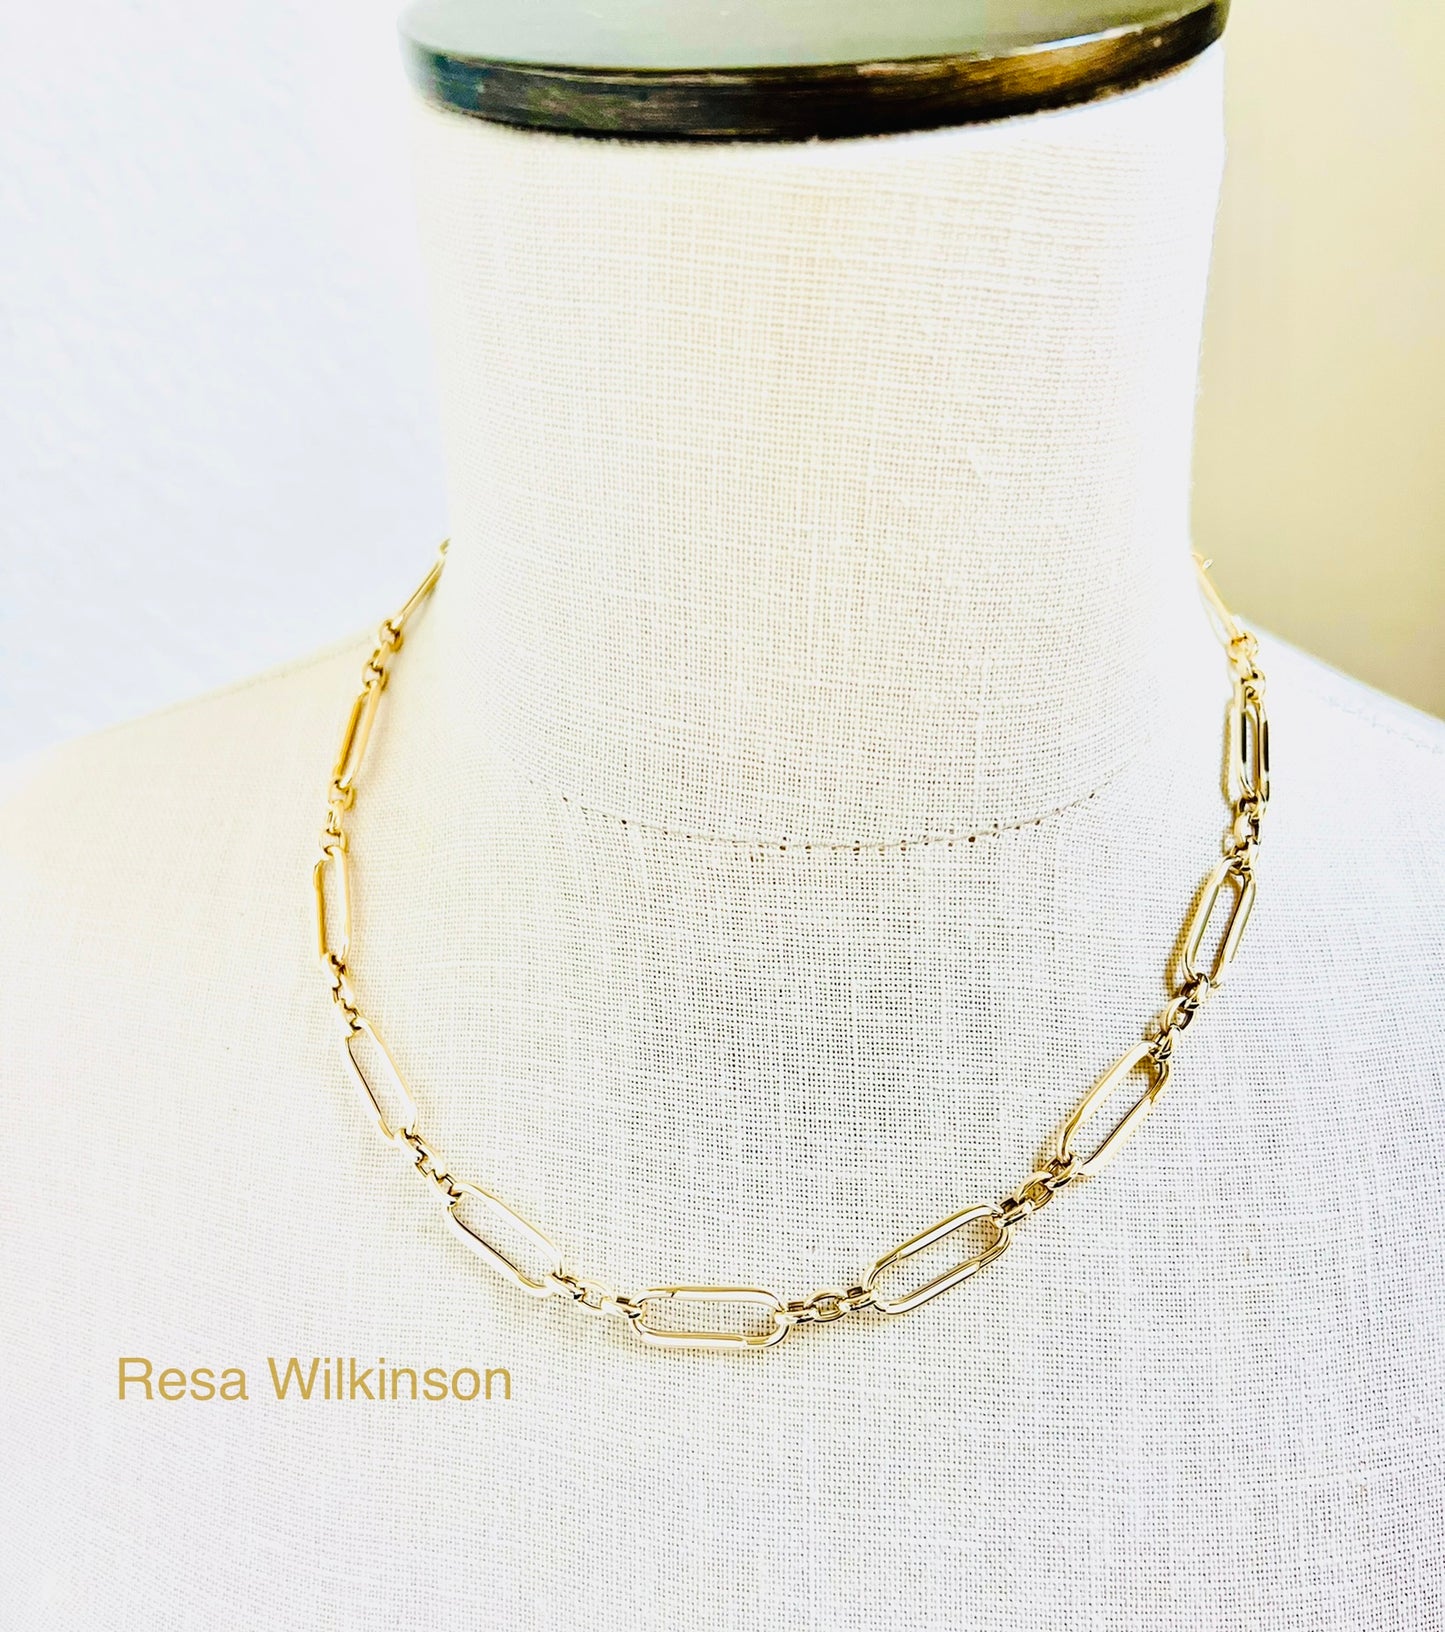 Mixed Links Gold Statement Necklace